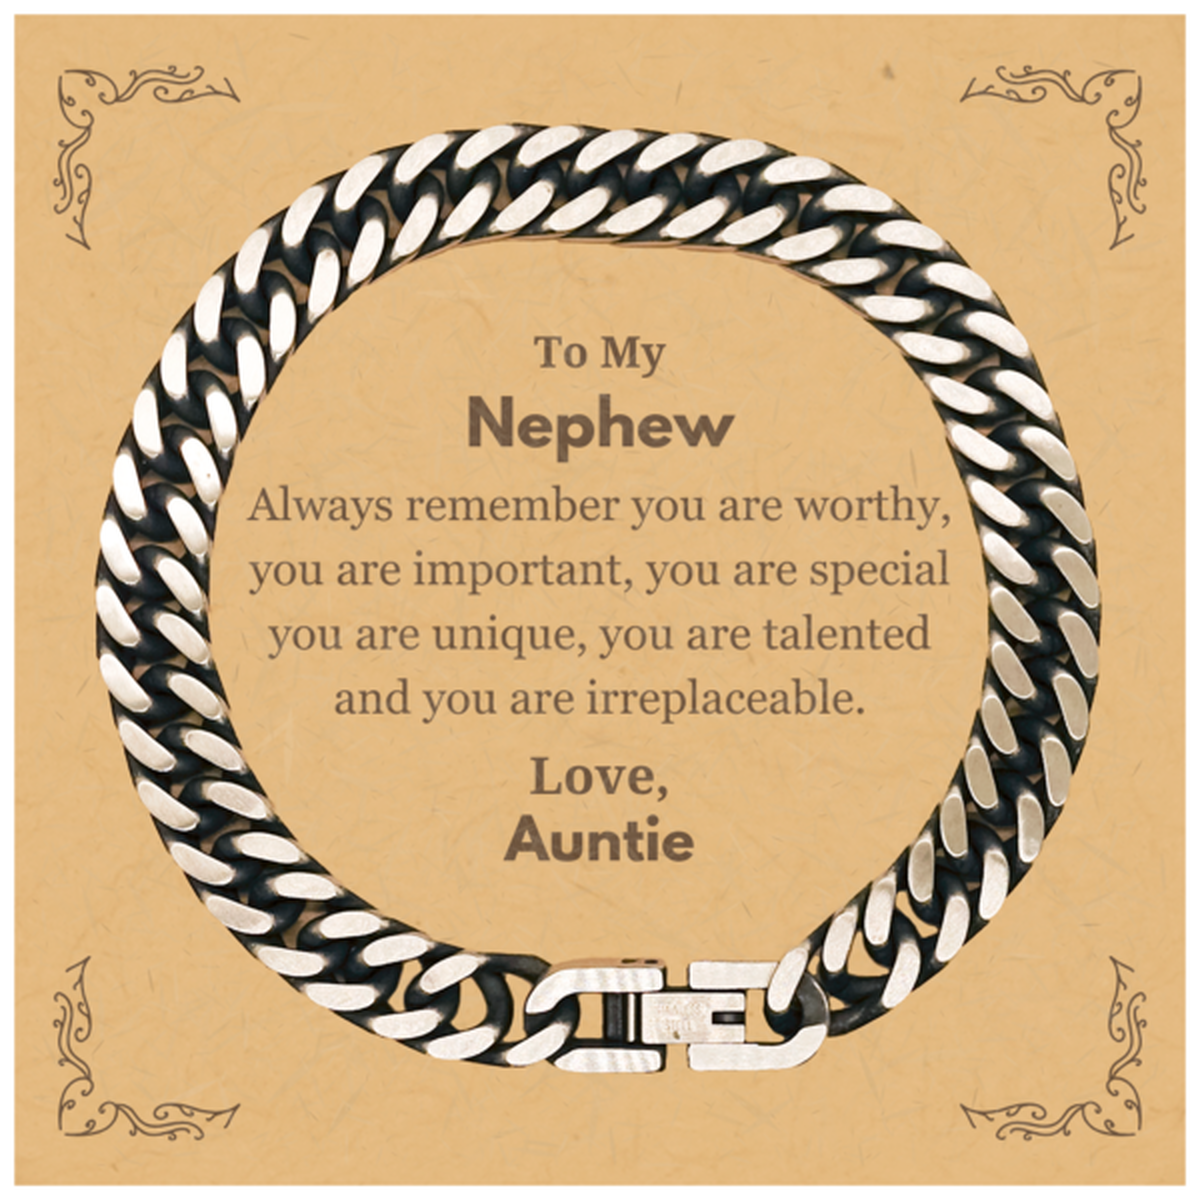 Nephew Birthday Gifts from Auntie, Inspirational Cuban Link Chain Bracelet for Nephew Christmas Graduation Gifts for Nephew Always remember you are worthy, you are important. Love, Auntie